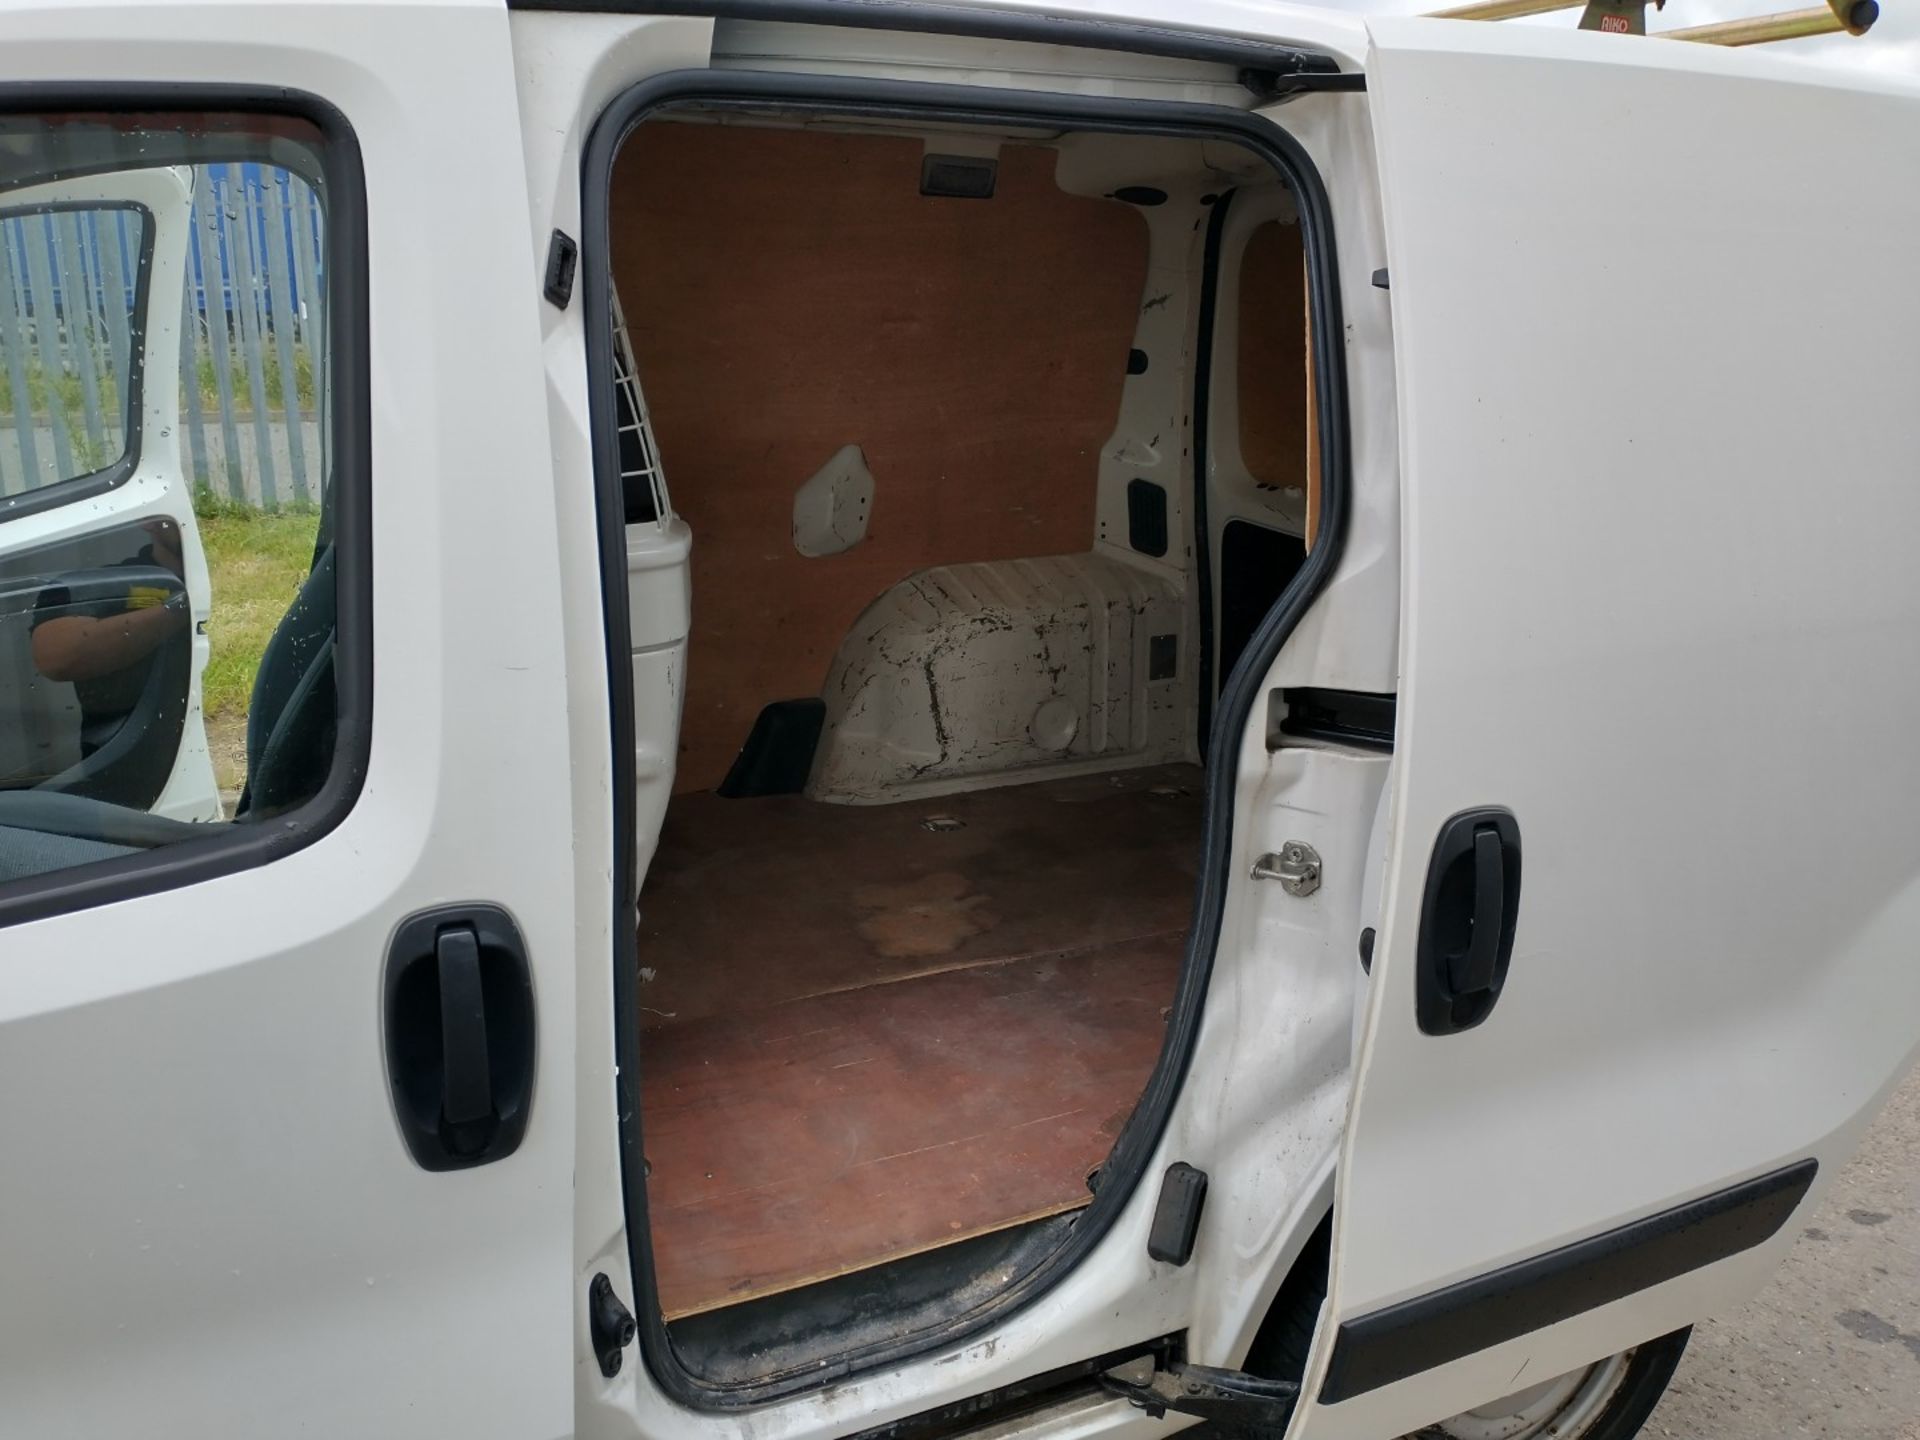 2015 Peugeot Bipper S Hdi White Panel - CL505 - Ref: VVS031 - Location: Corby, Northamptonshire - Image 24 of 25